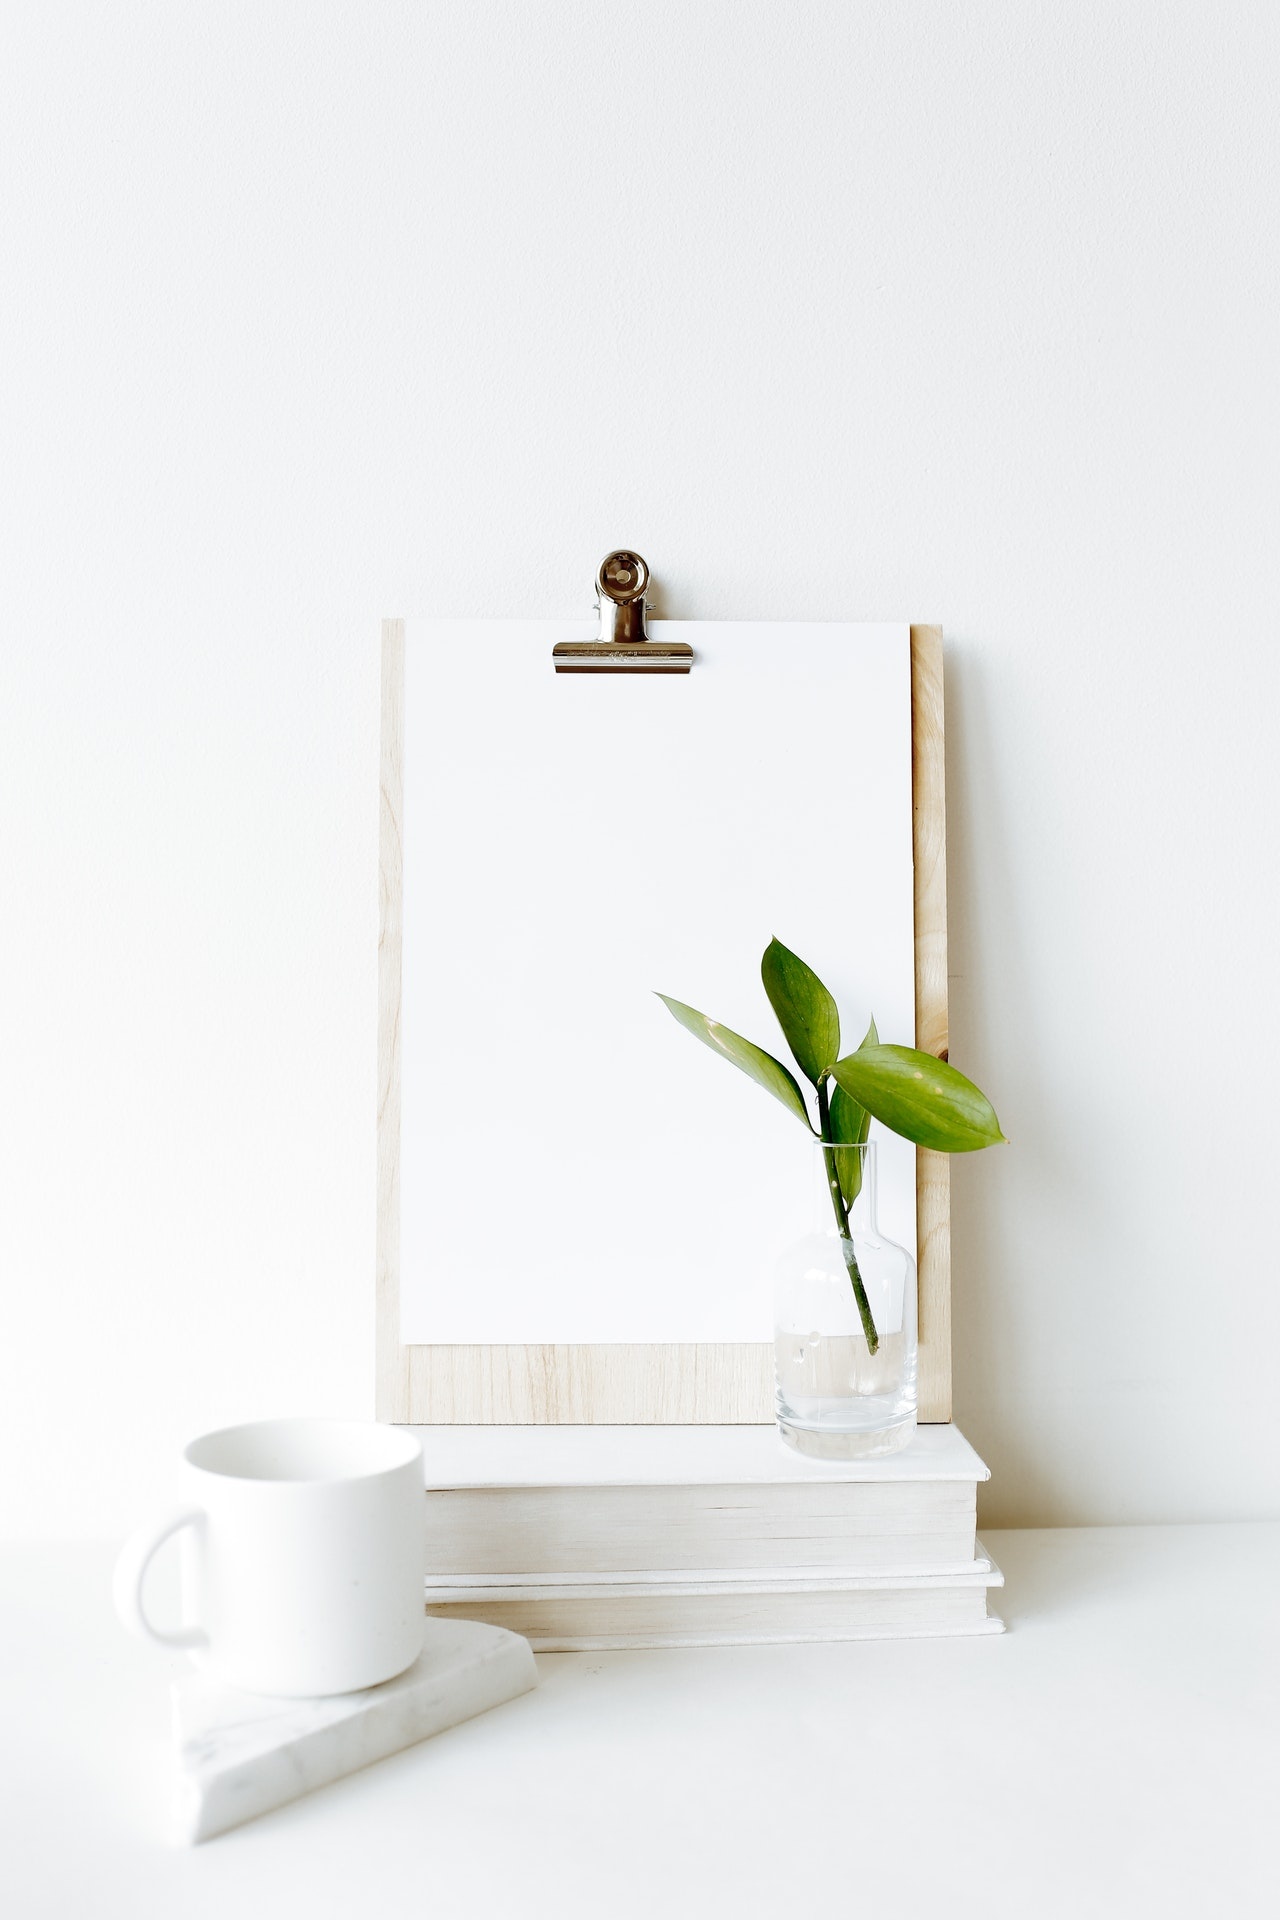 Minimalist photography, Artistic simplicity, Visual serenity, Composed frames, Pared-down captures, 1280x1920 HD Handy